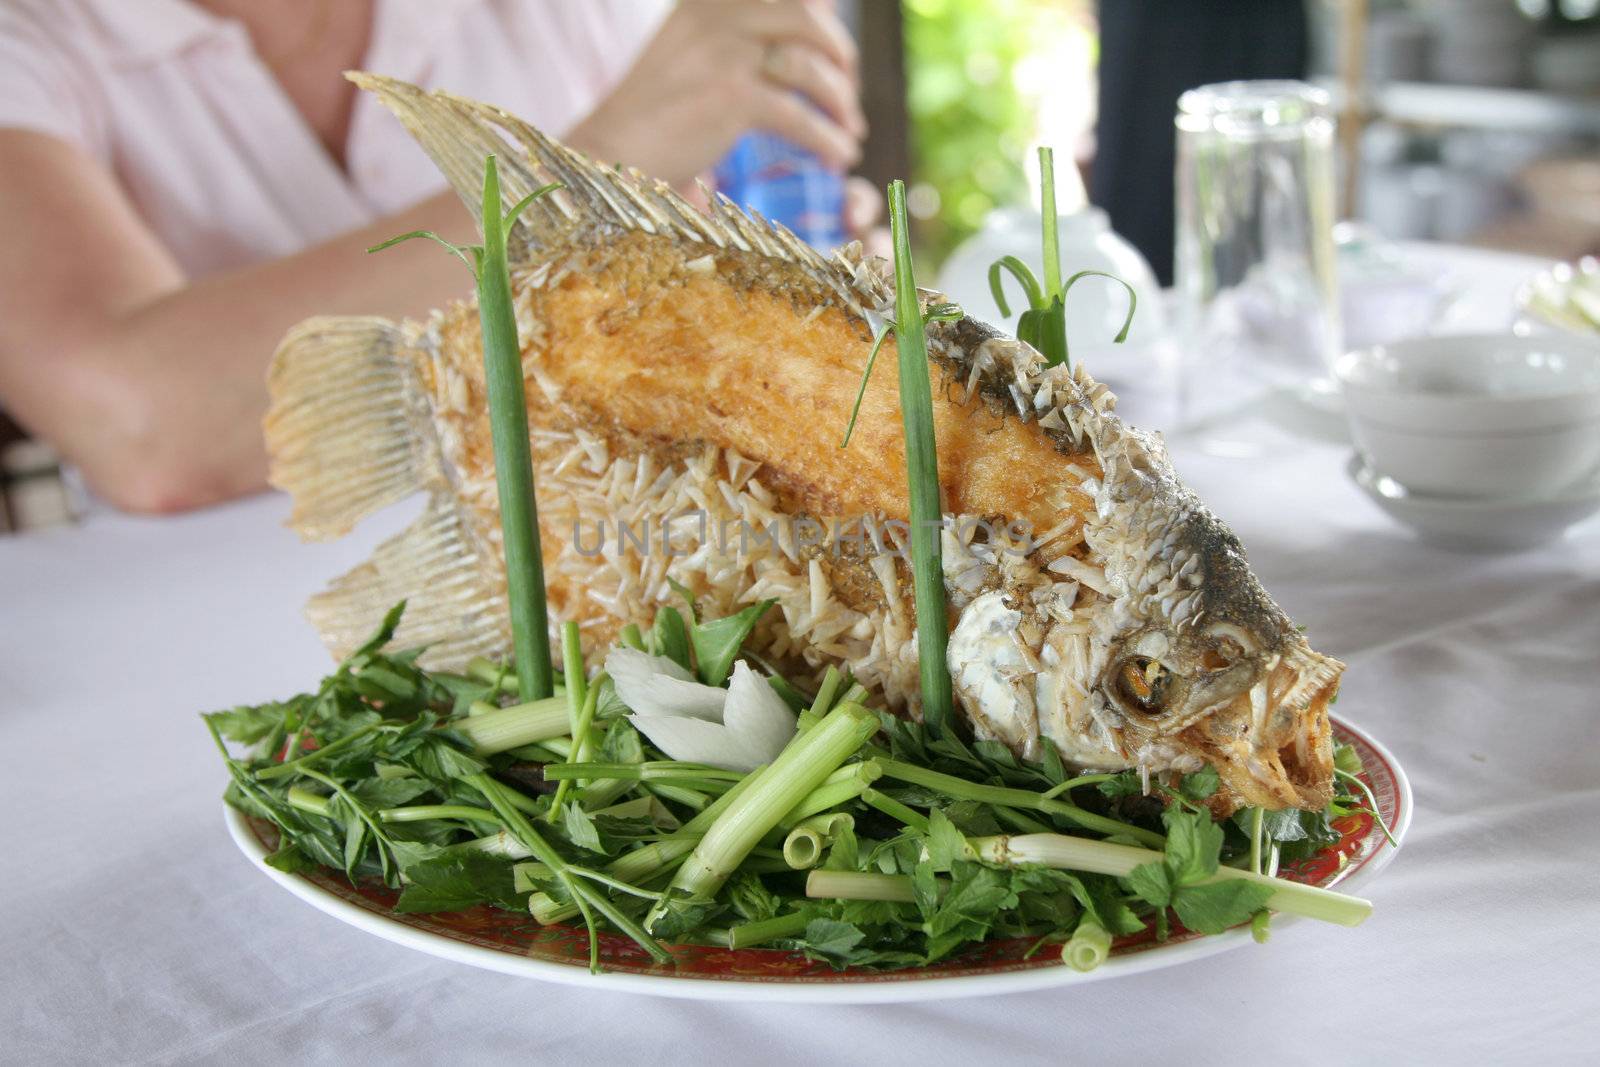 Freshly prepared fish served at the table